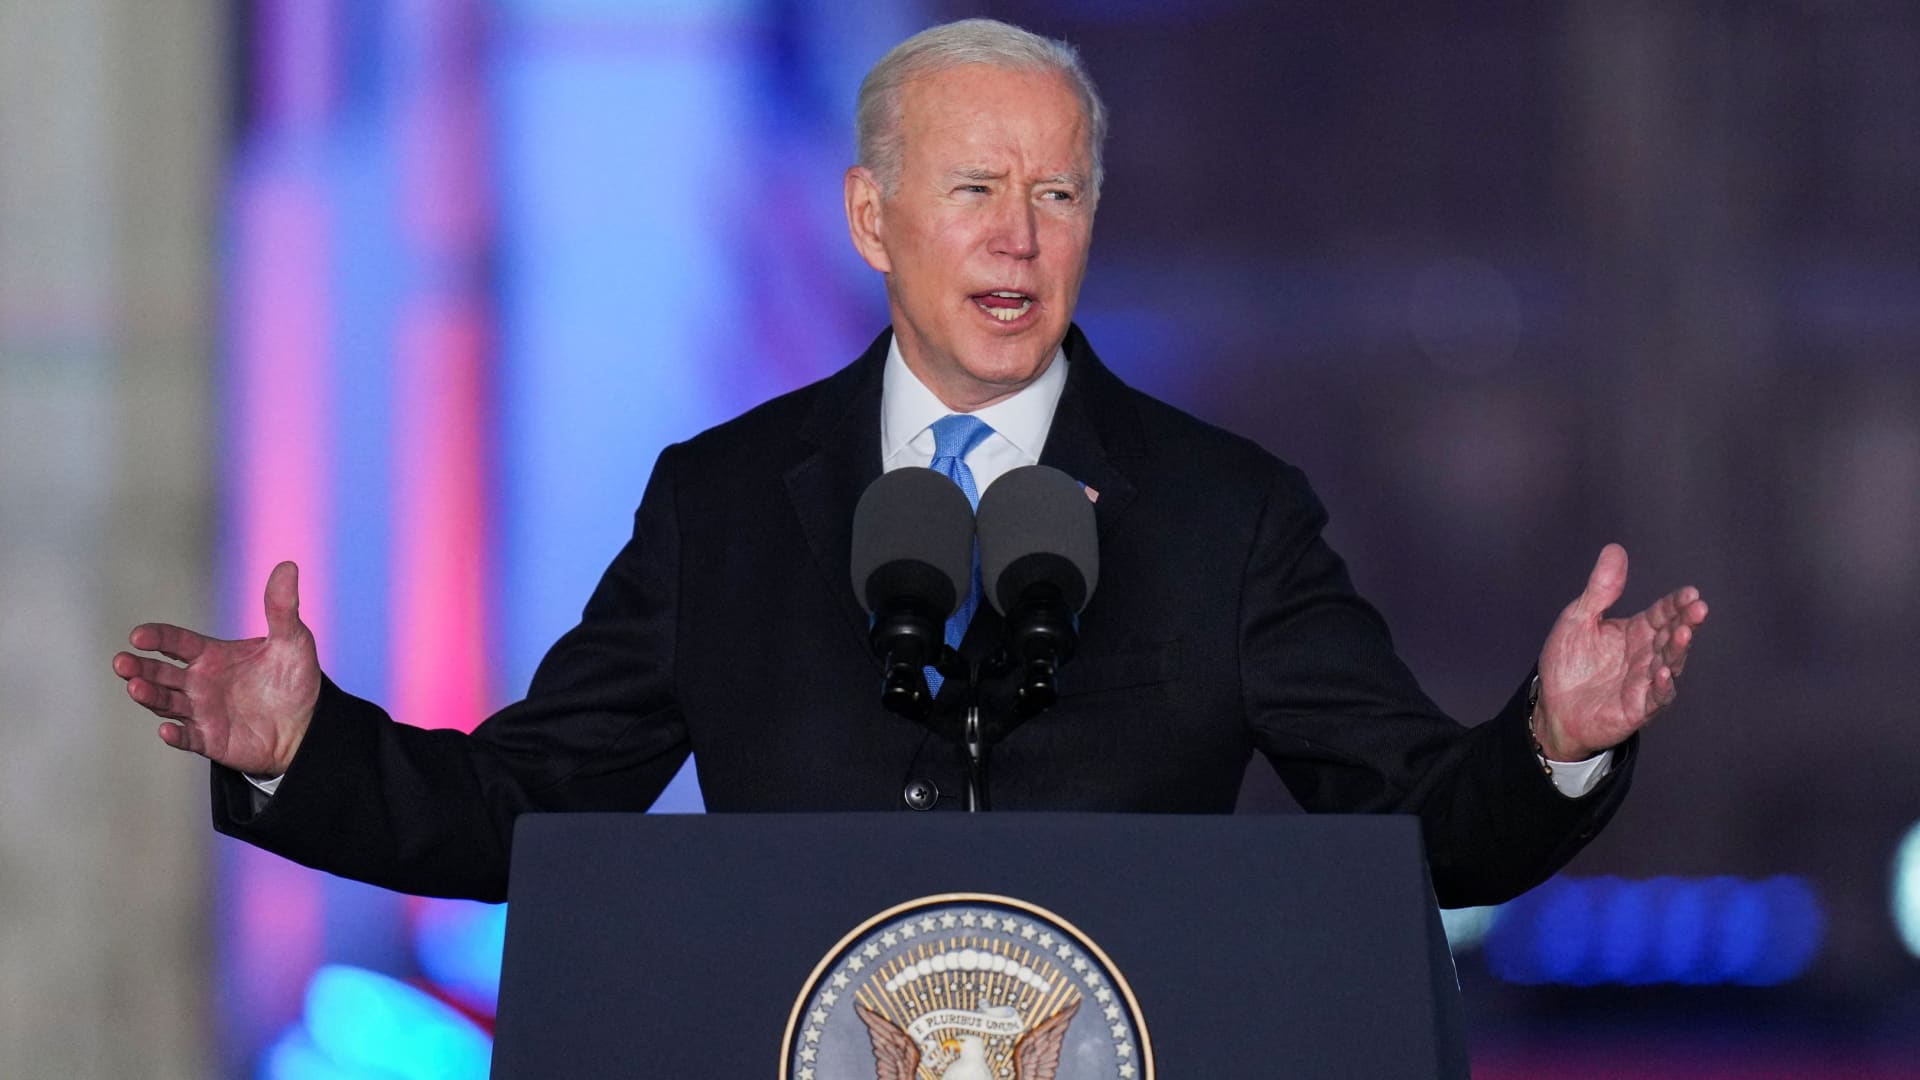 Biden's 2023 budget includes $14.8 billion for Social Security. Here's what changes that could bring